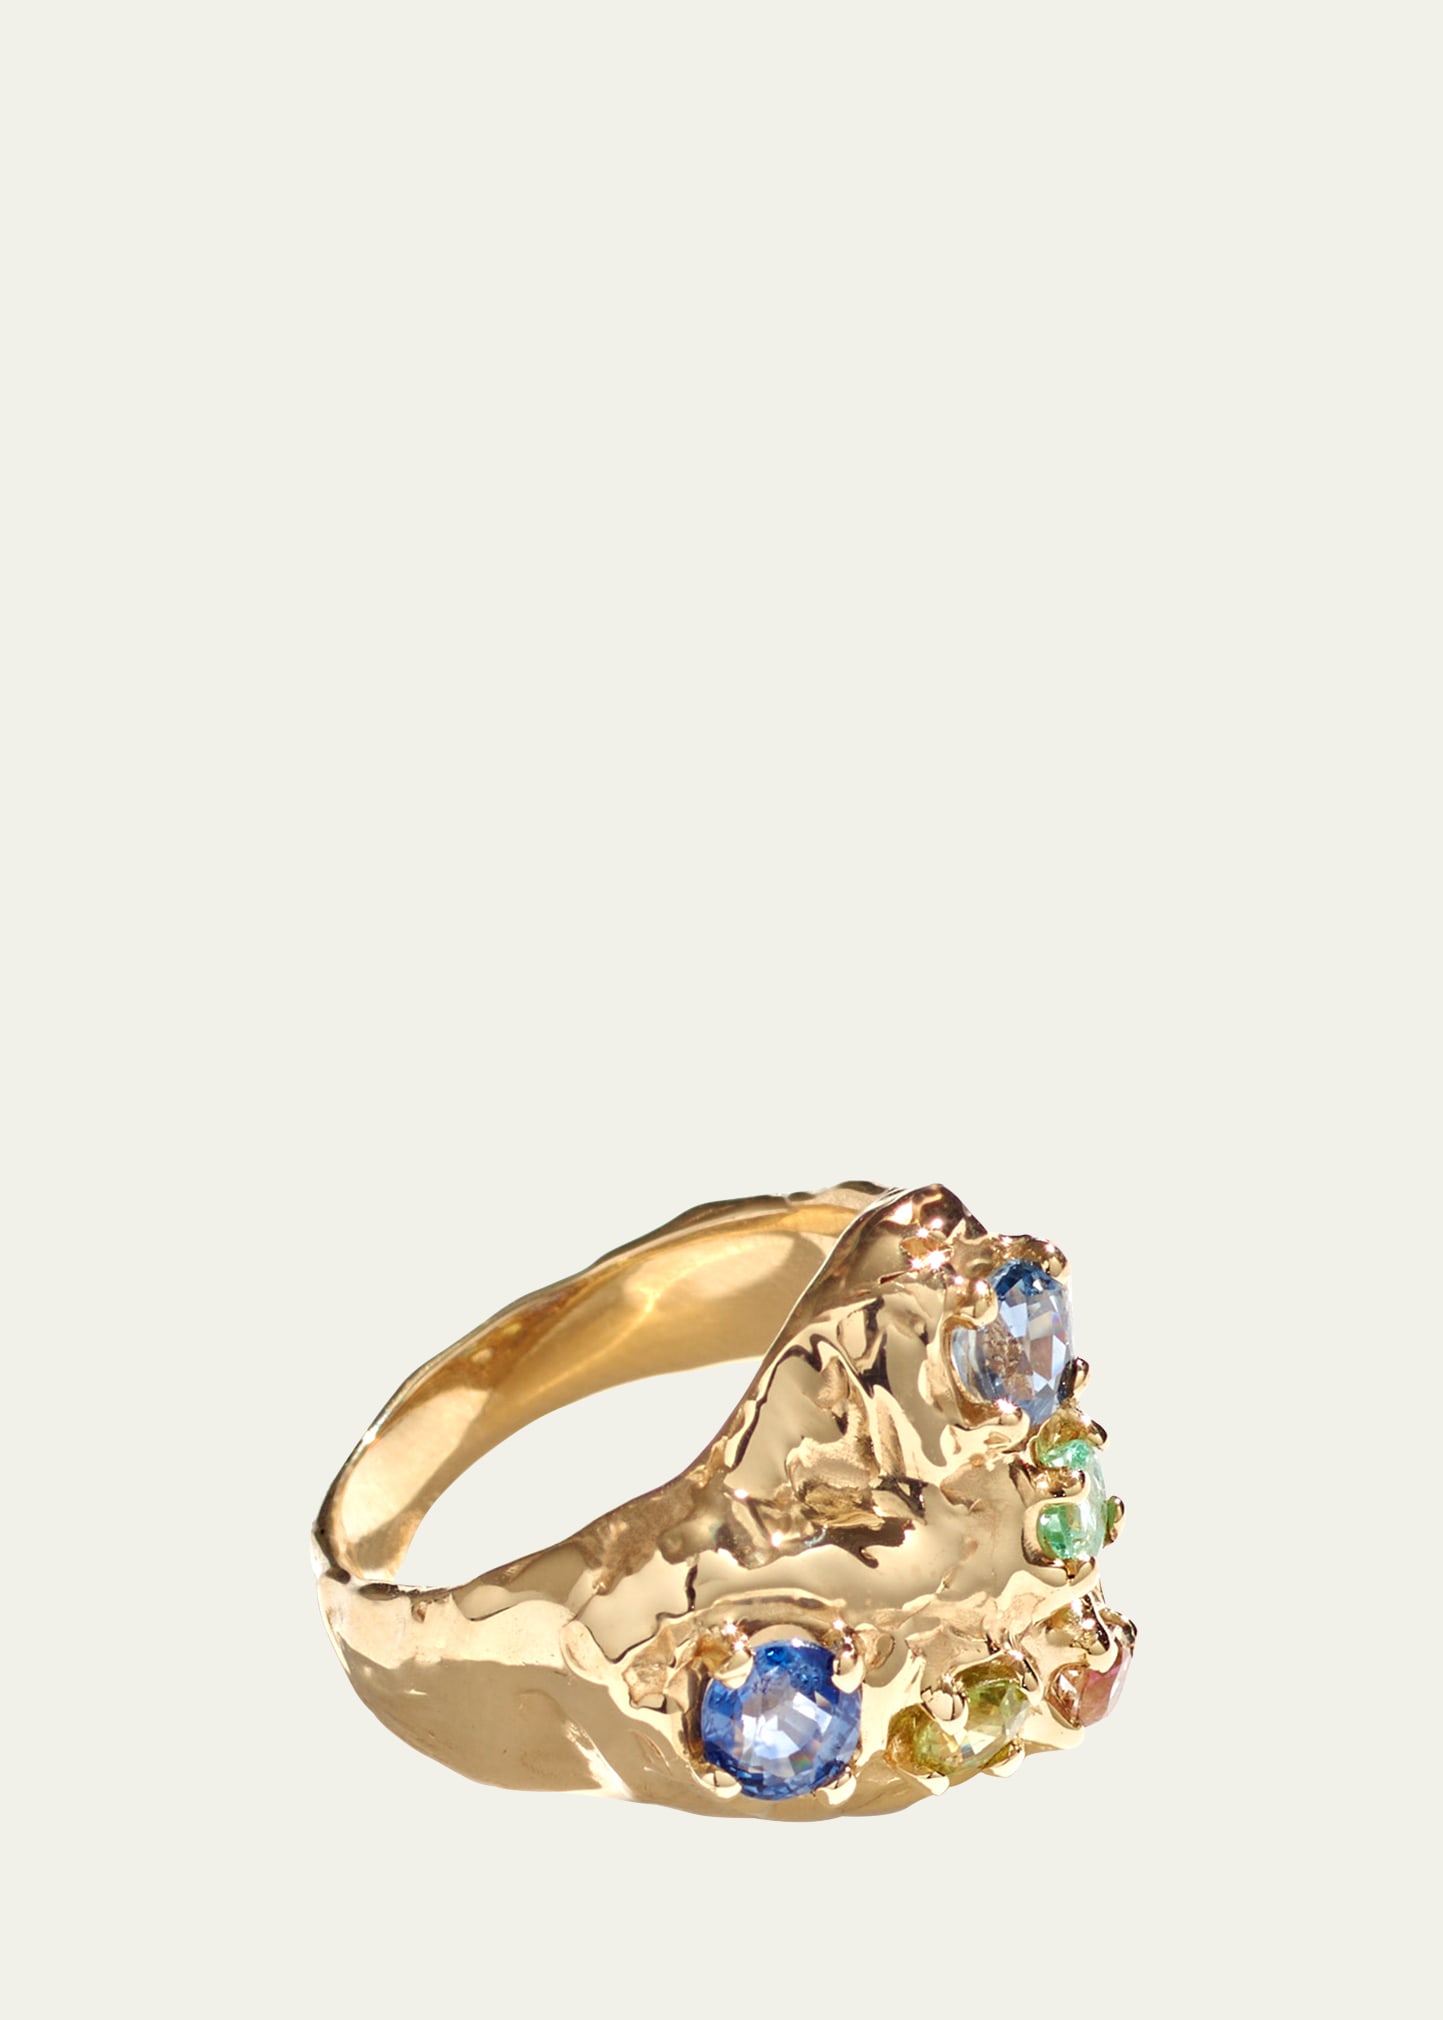 Heart Ring with Precious Stones